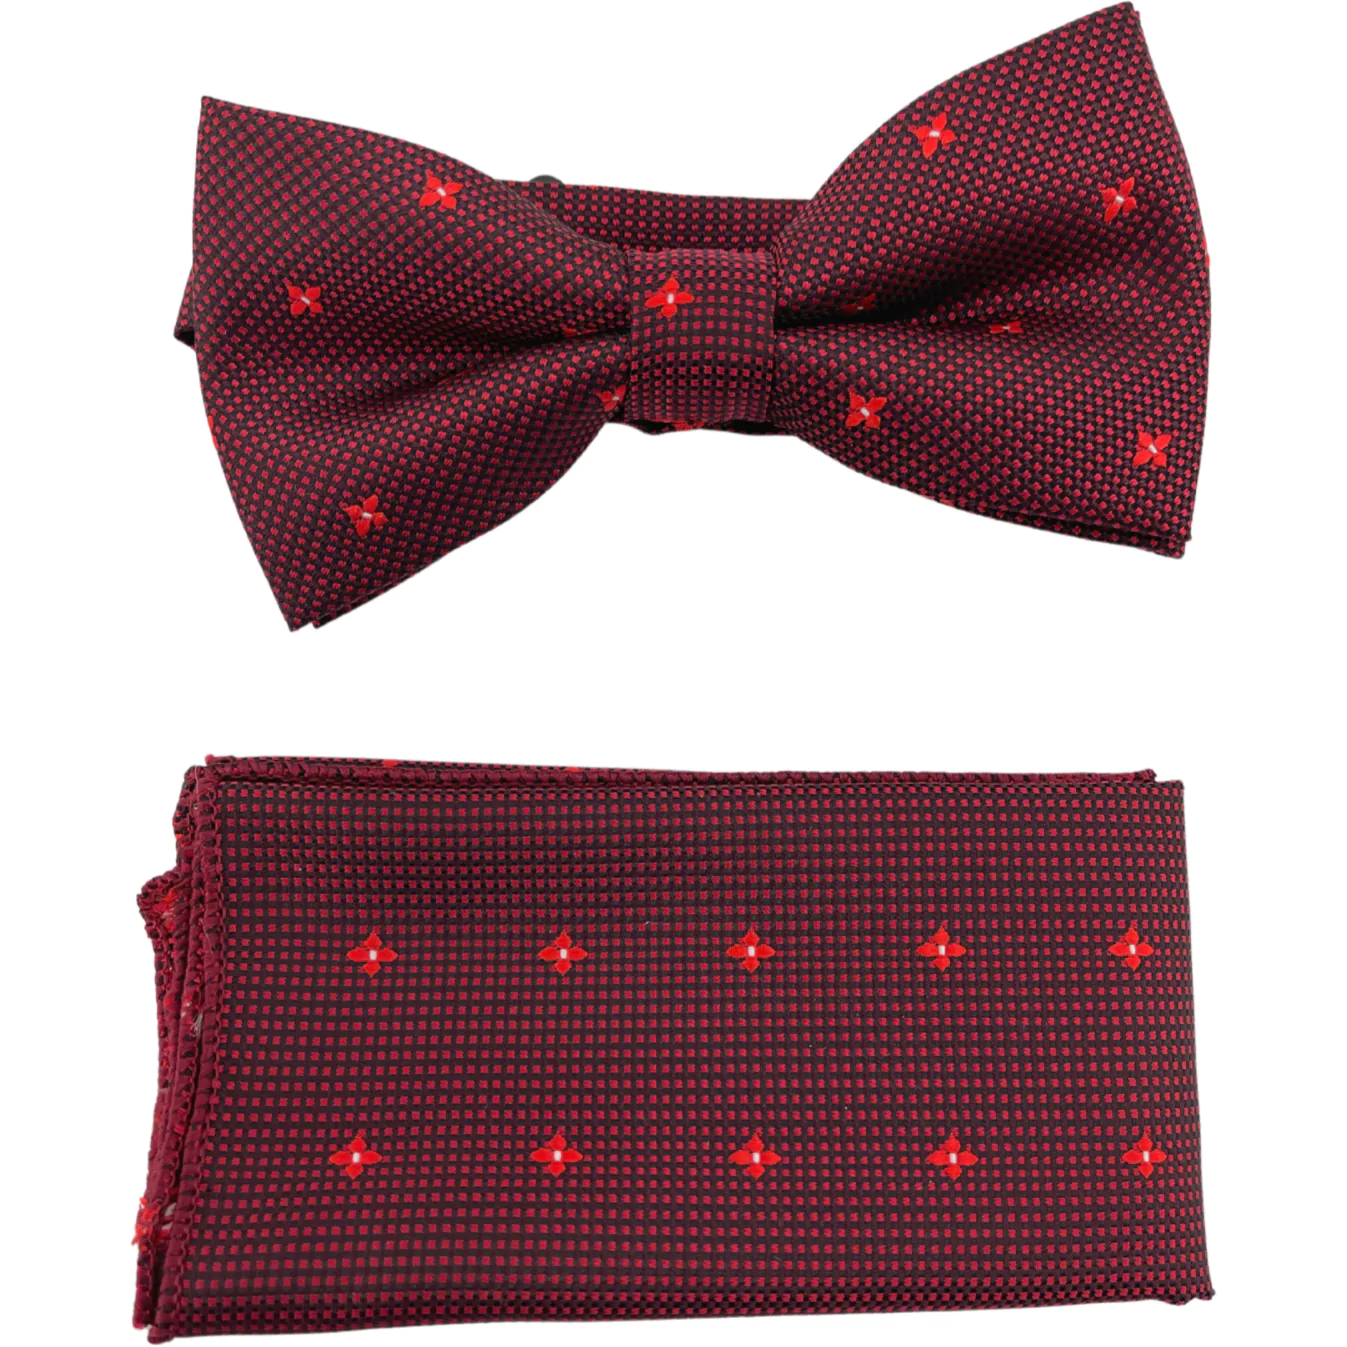 Youga Men's Bow Tie and Pocket Square Set / Burgundy / Men's Accessory